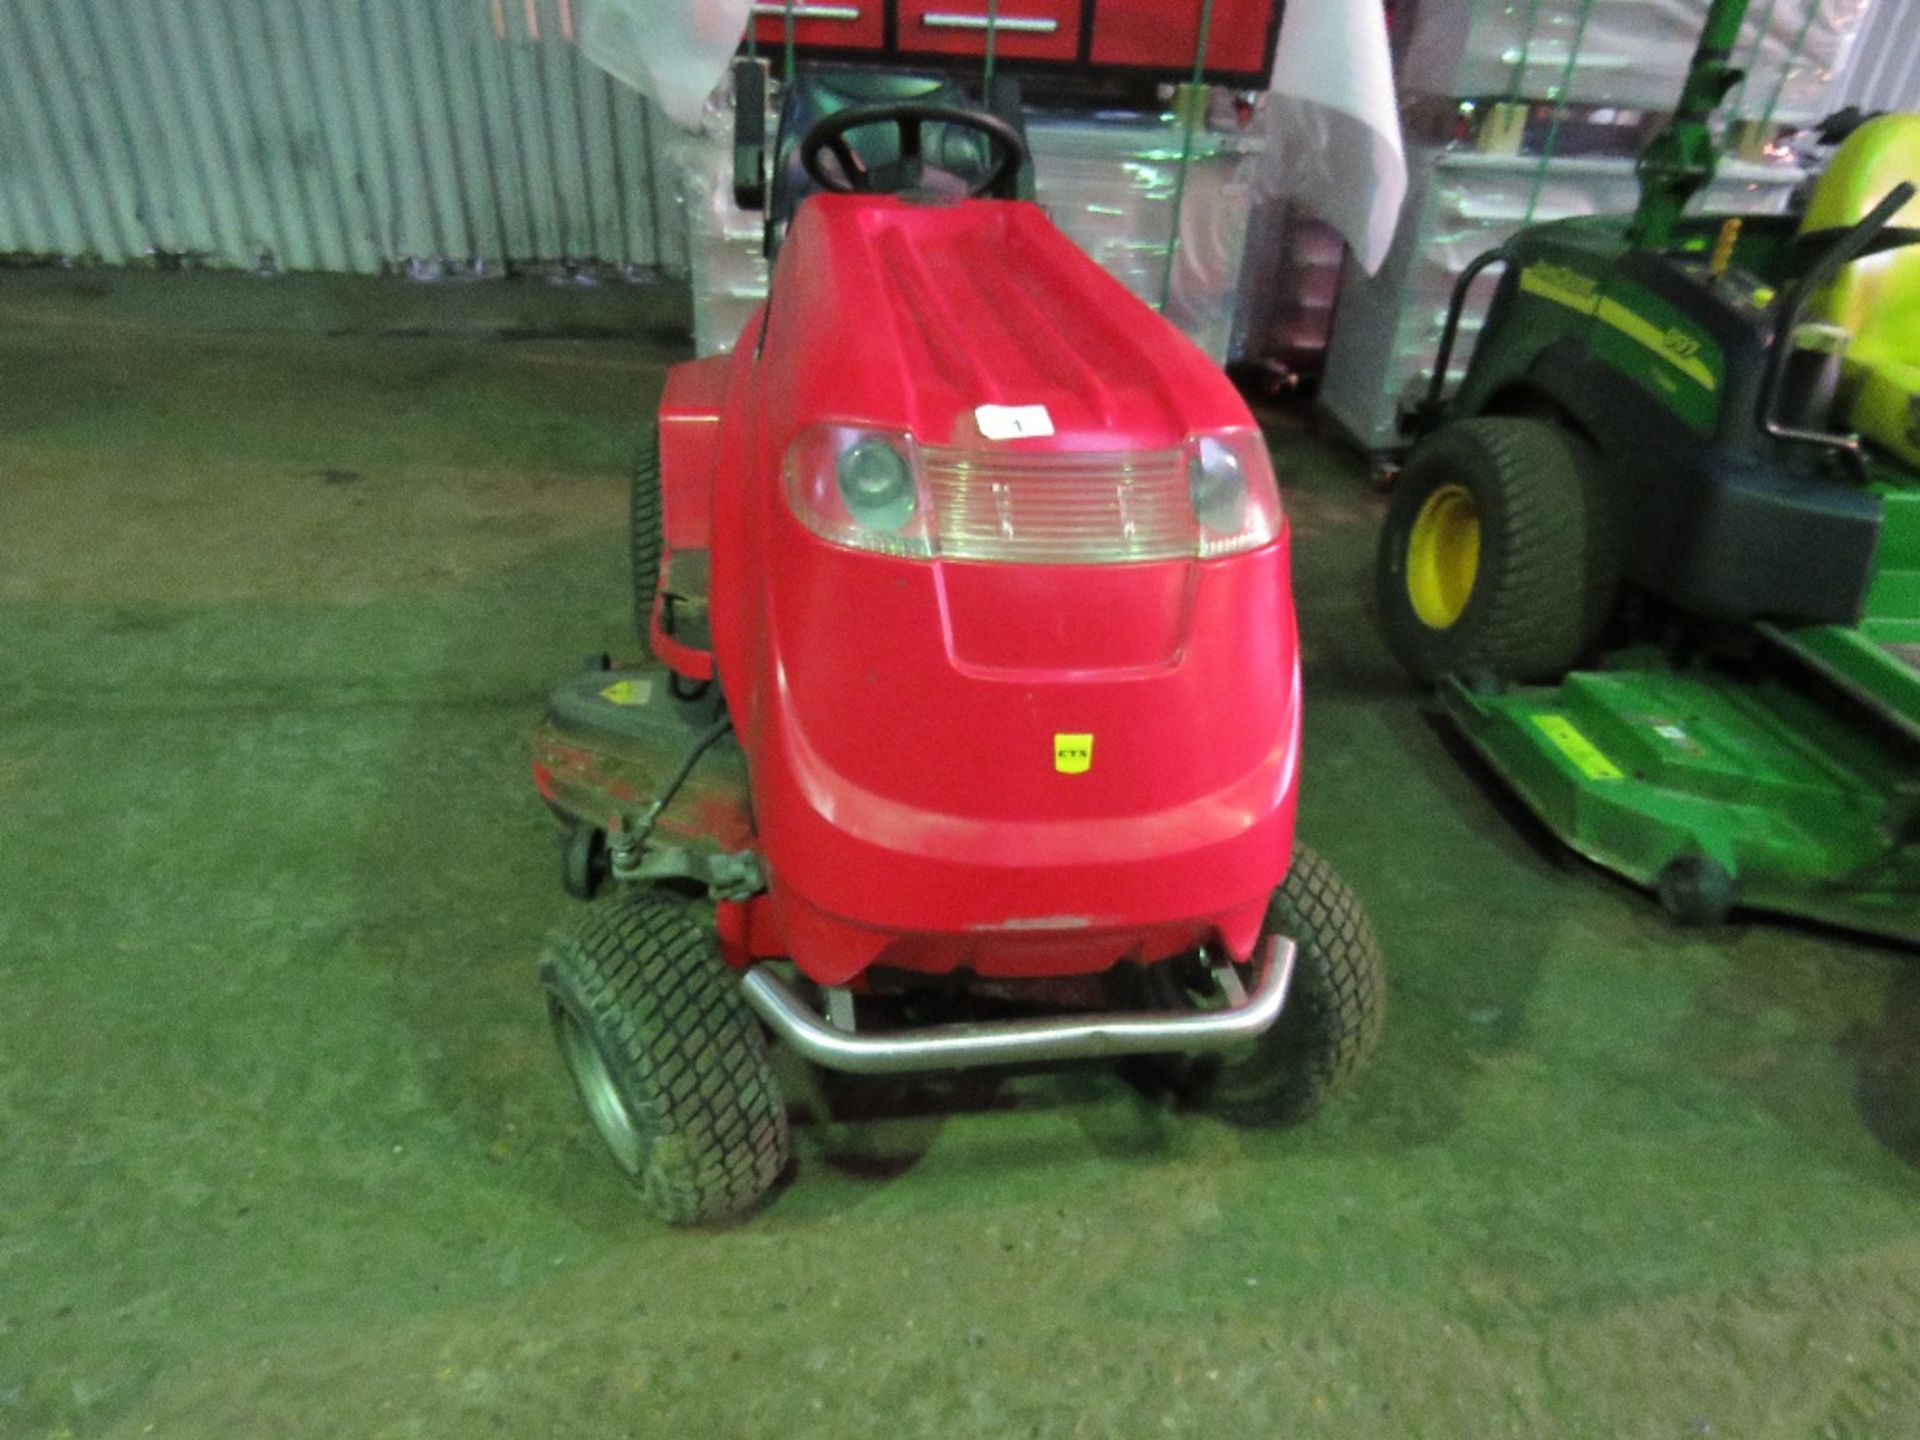 COUNTAX D50-LN DIESEL ENGINED RIDE ON MOWER, SOURCED FROM FOOTBALL CLUB HAVING PURCHASED A LARGER MA - Image 2 of 8